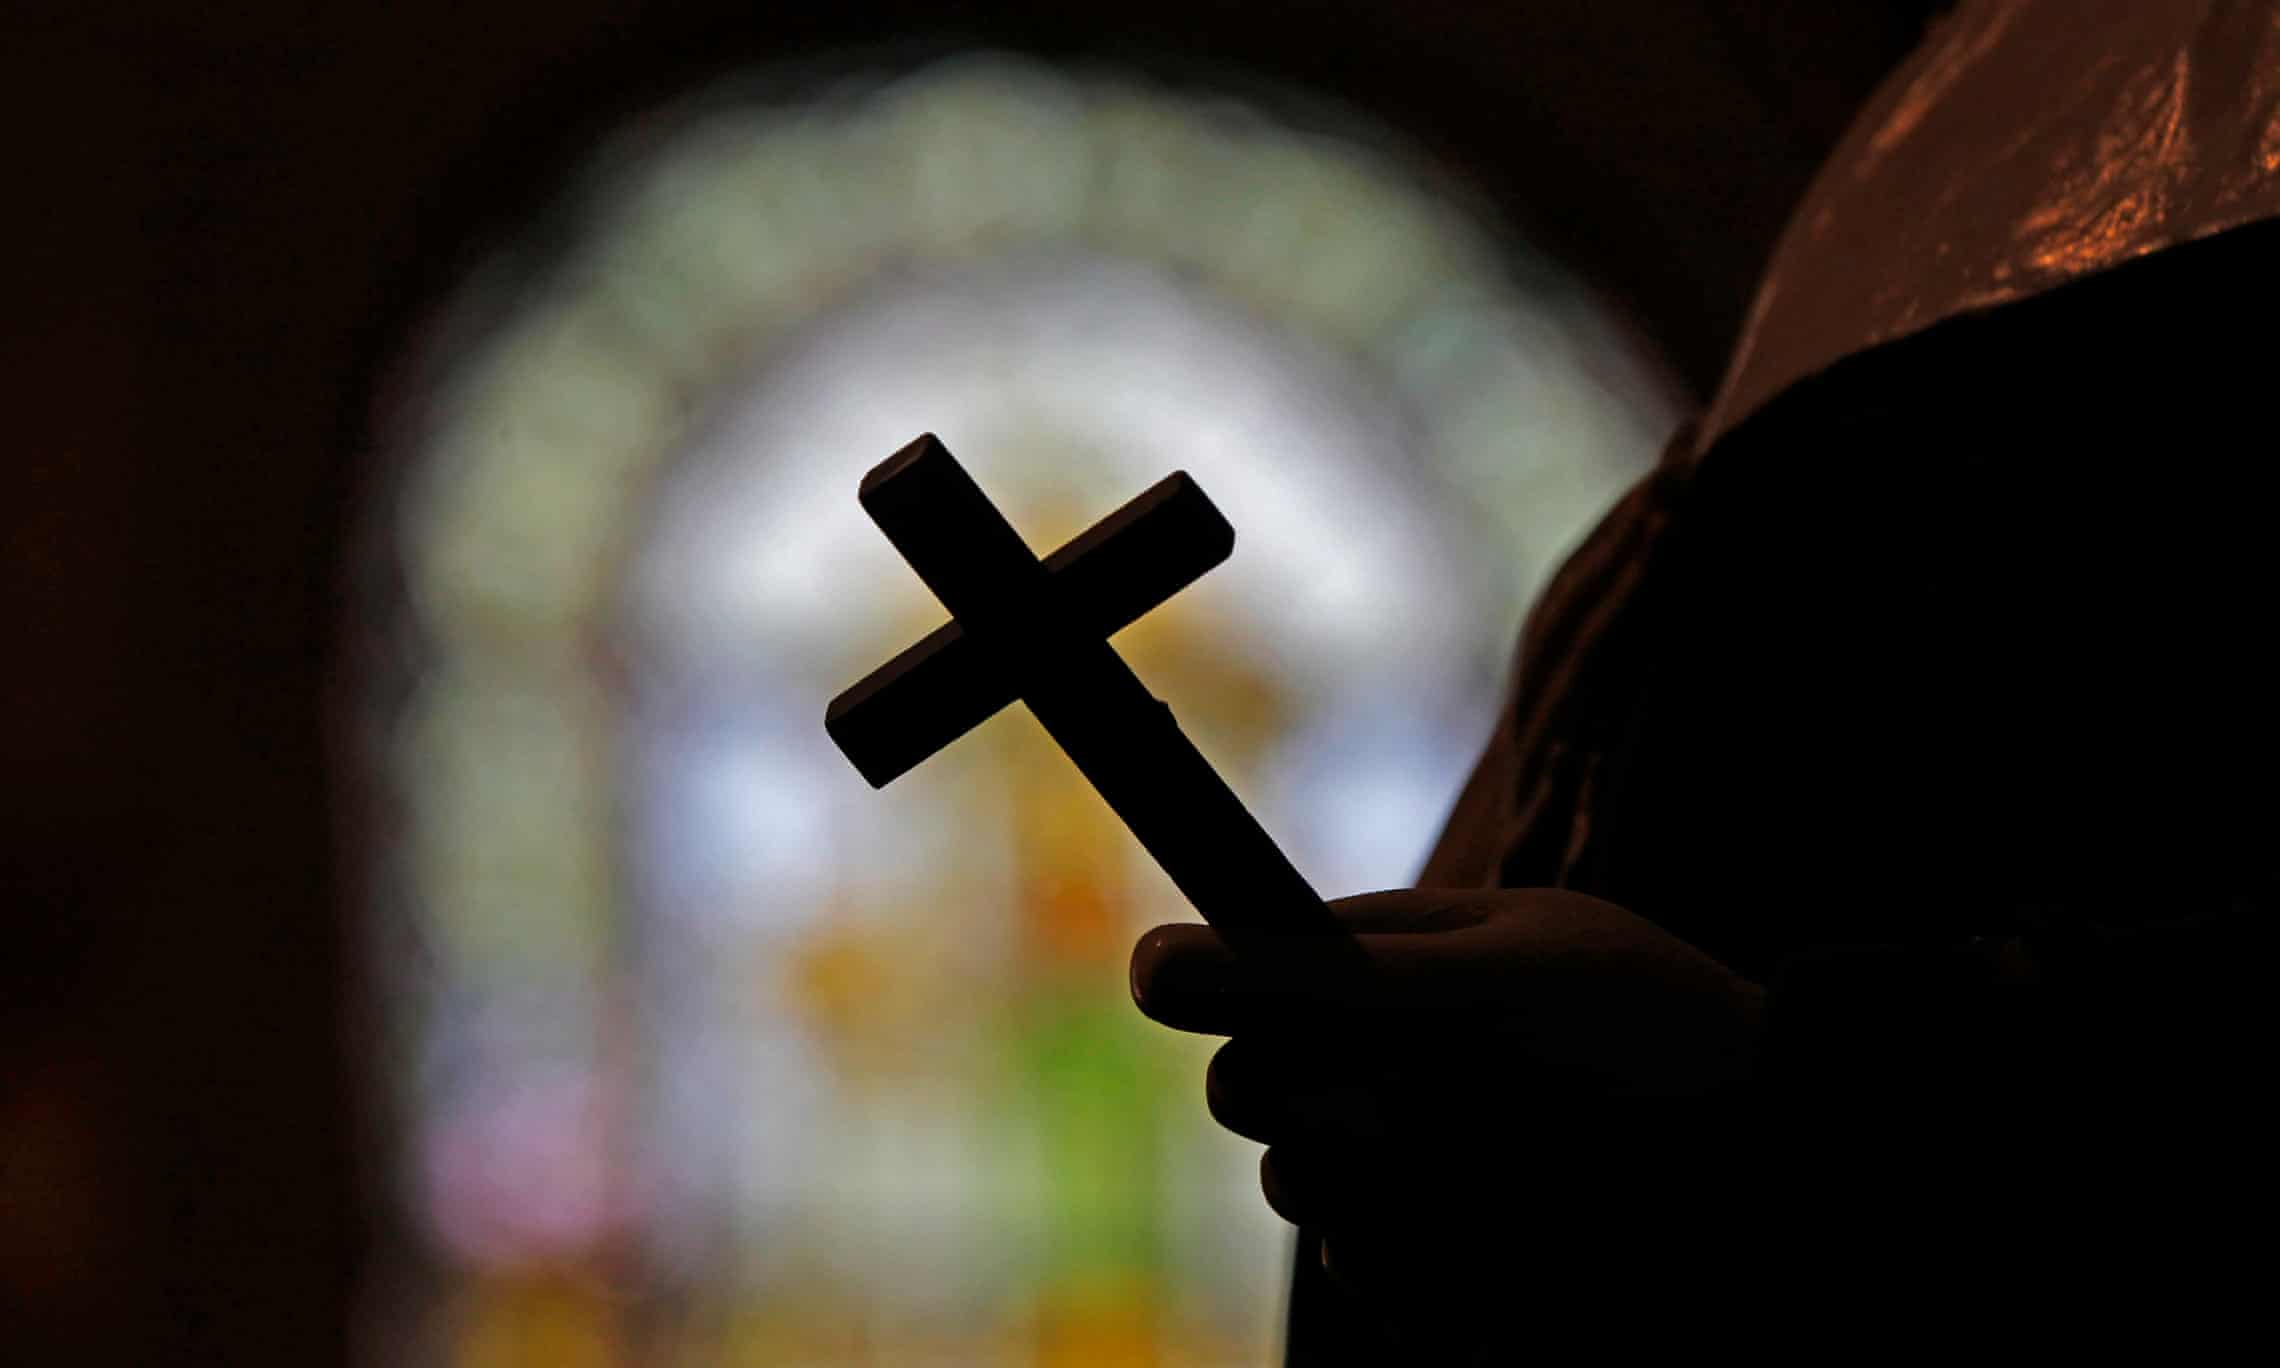 Priest accused of rape is not fit to stand trial